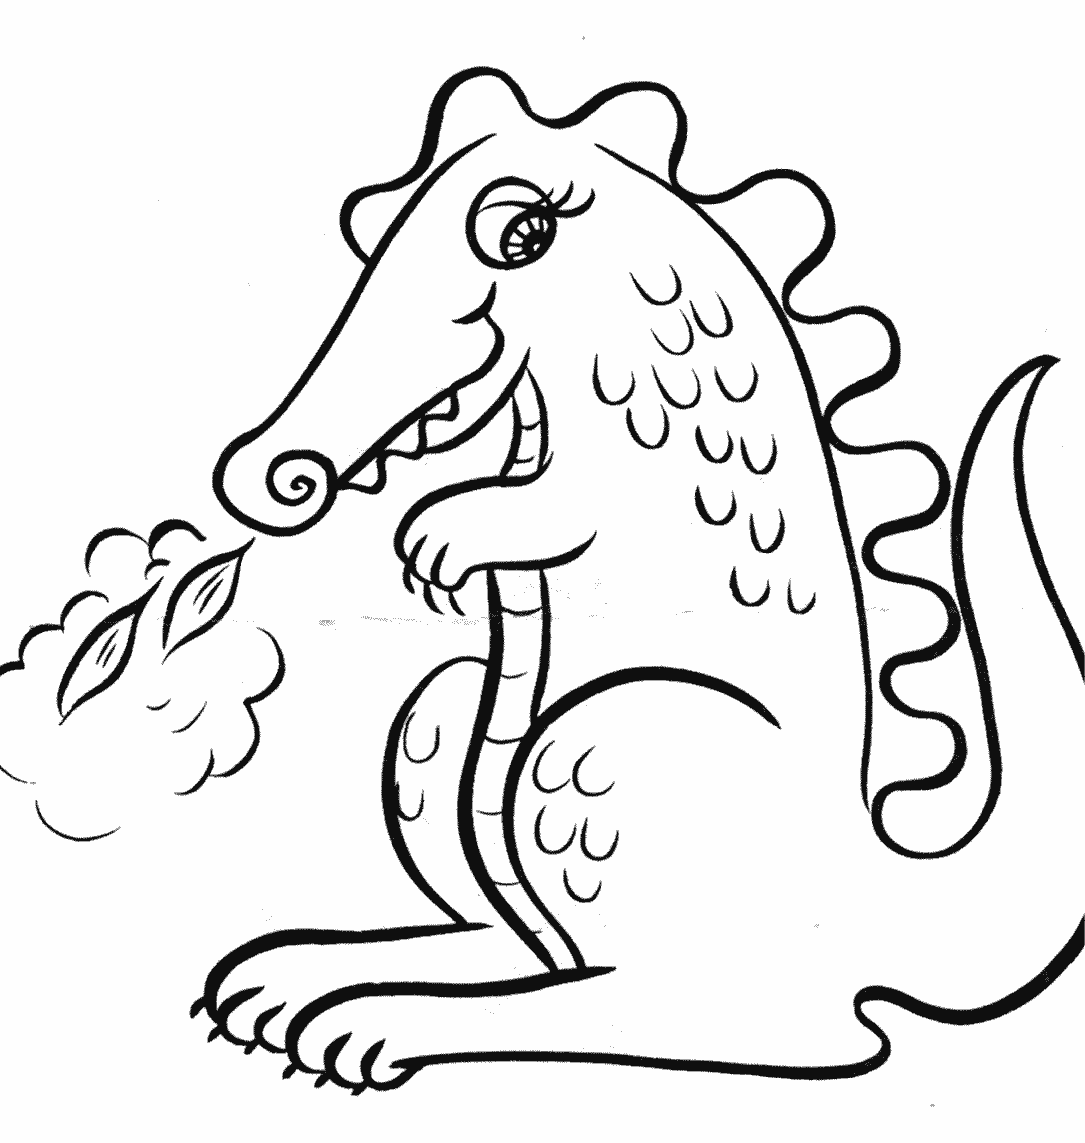 animated-coloring-pages-dragon-image-0007